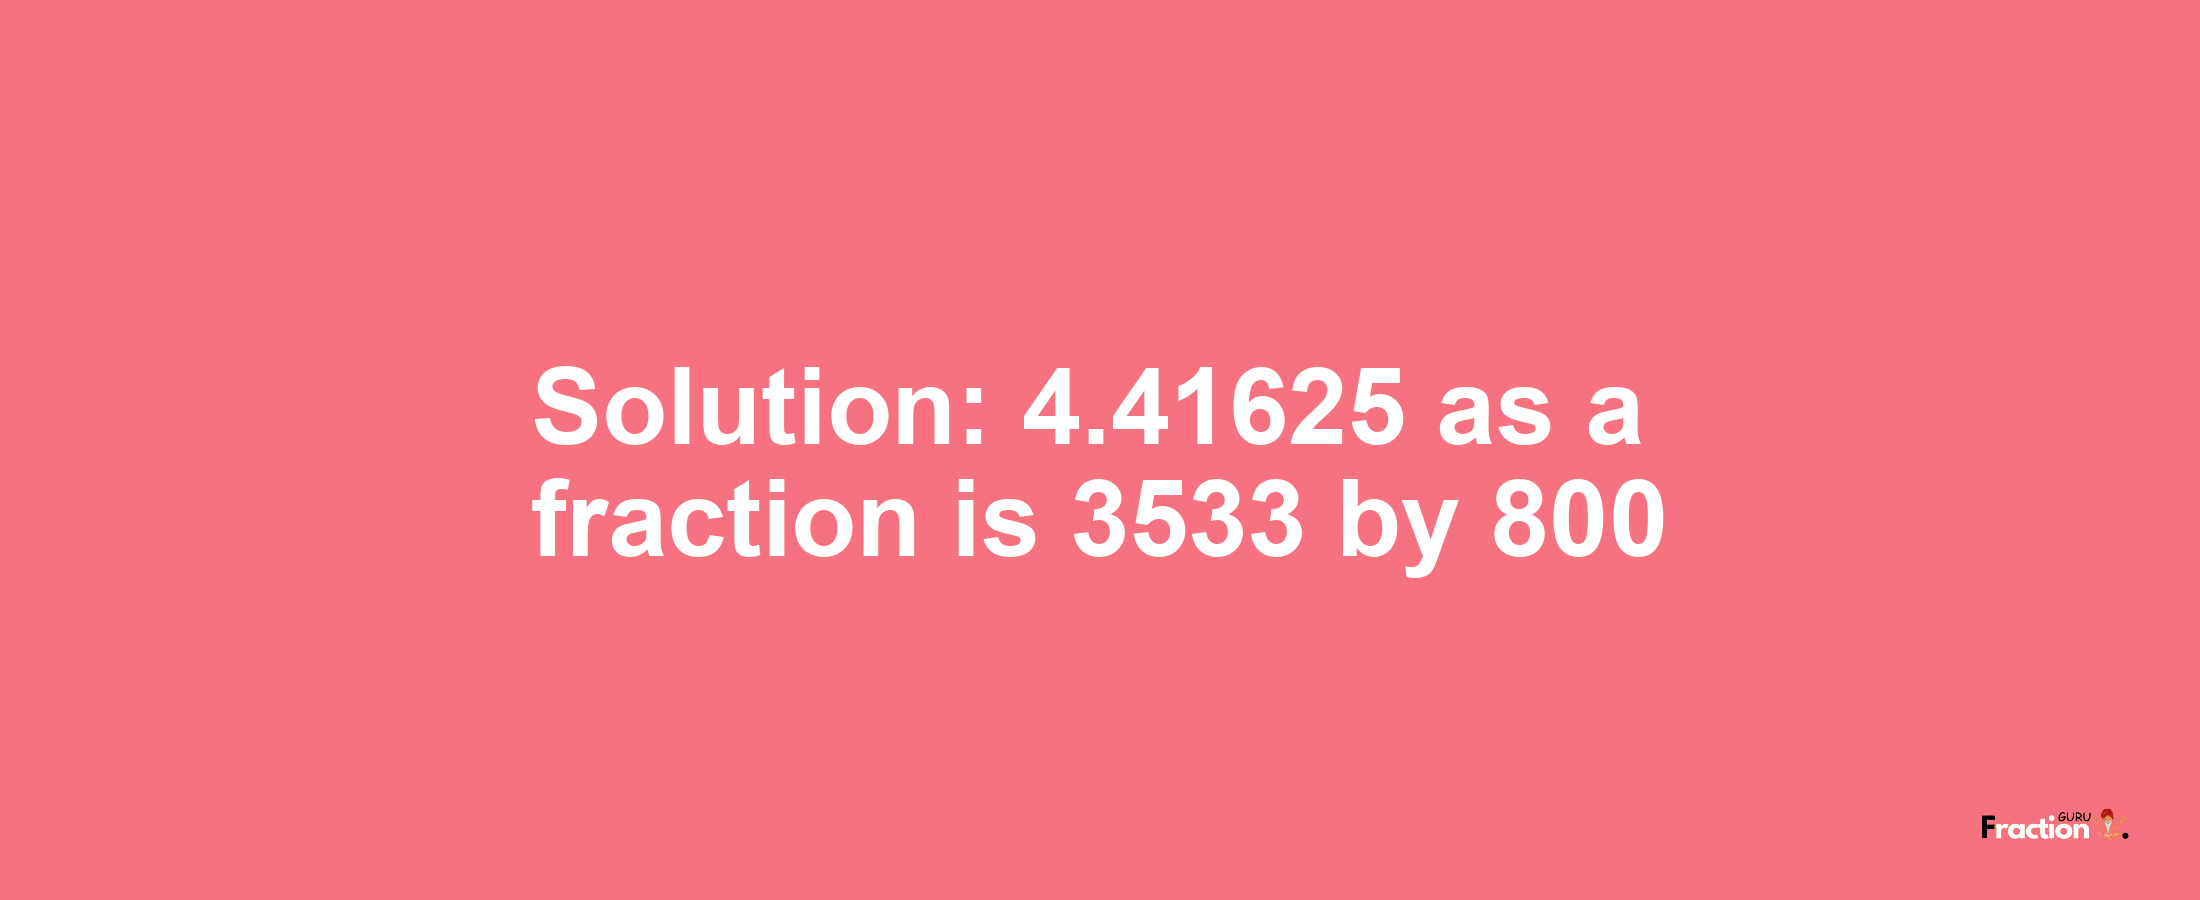 Solution:4.41625 as a fraction is 3533/800